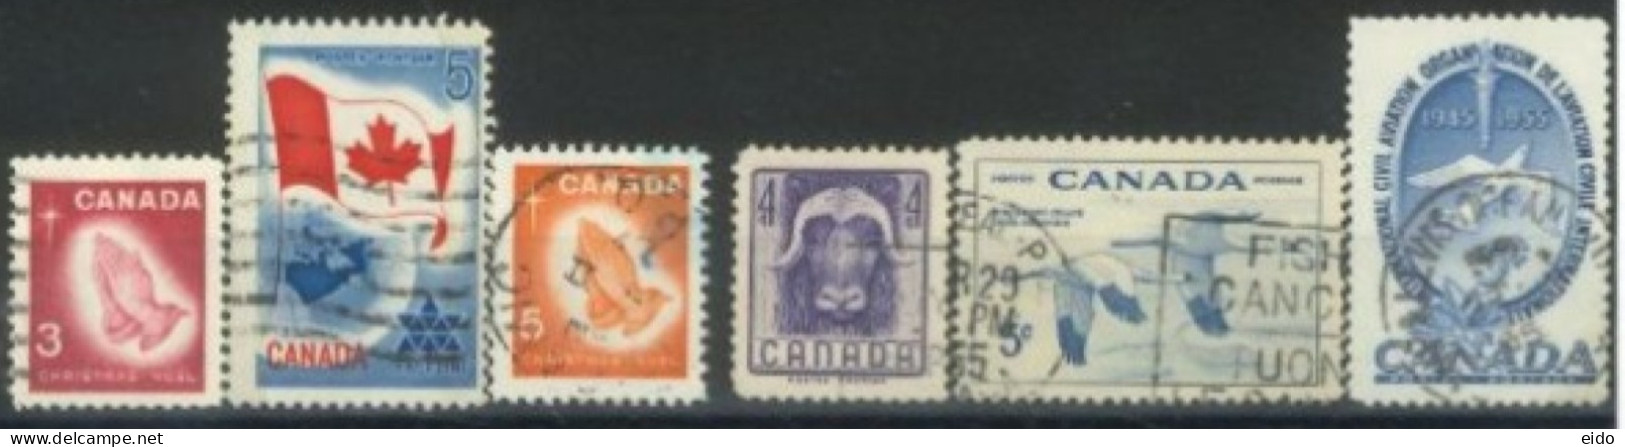 CANADA - 1955/67, STAMPS SET OF 6, USED. - Usati